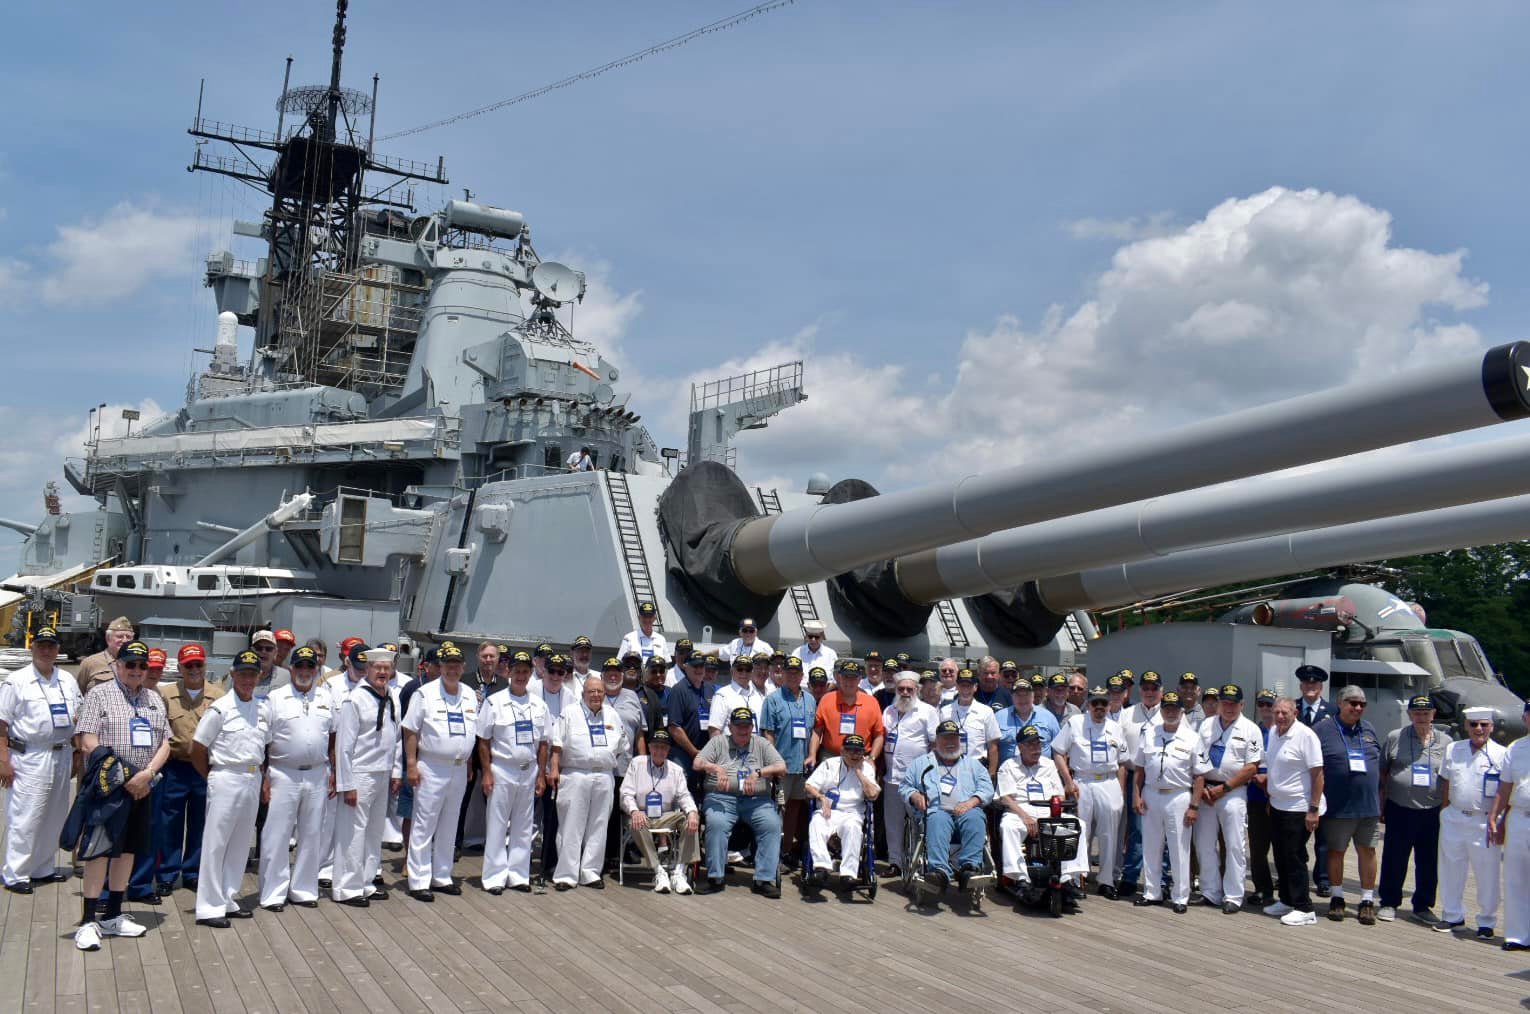 Reunion Group Photo onboard the USS New Jersey BB-62